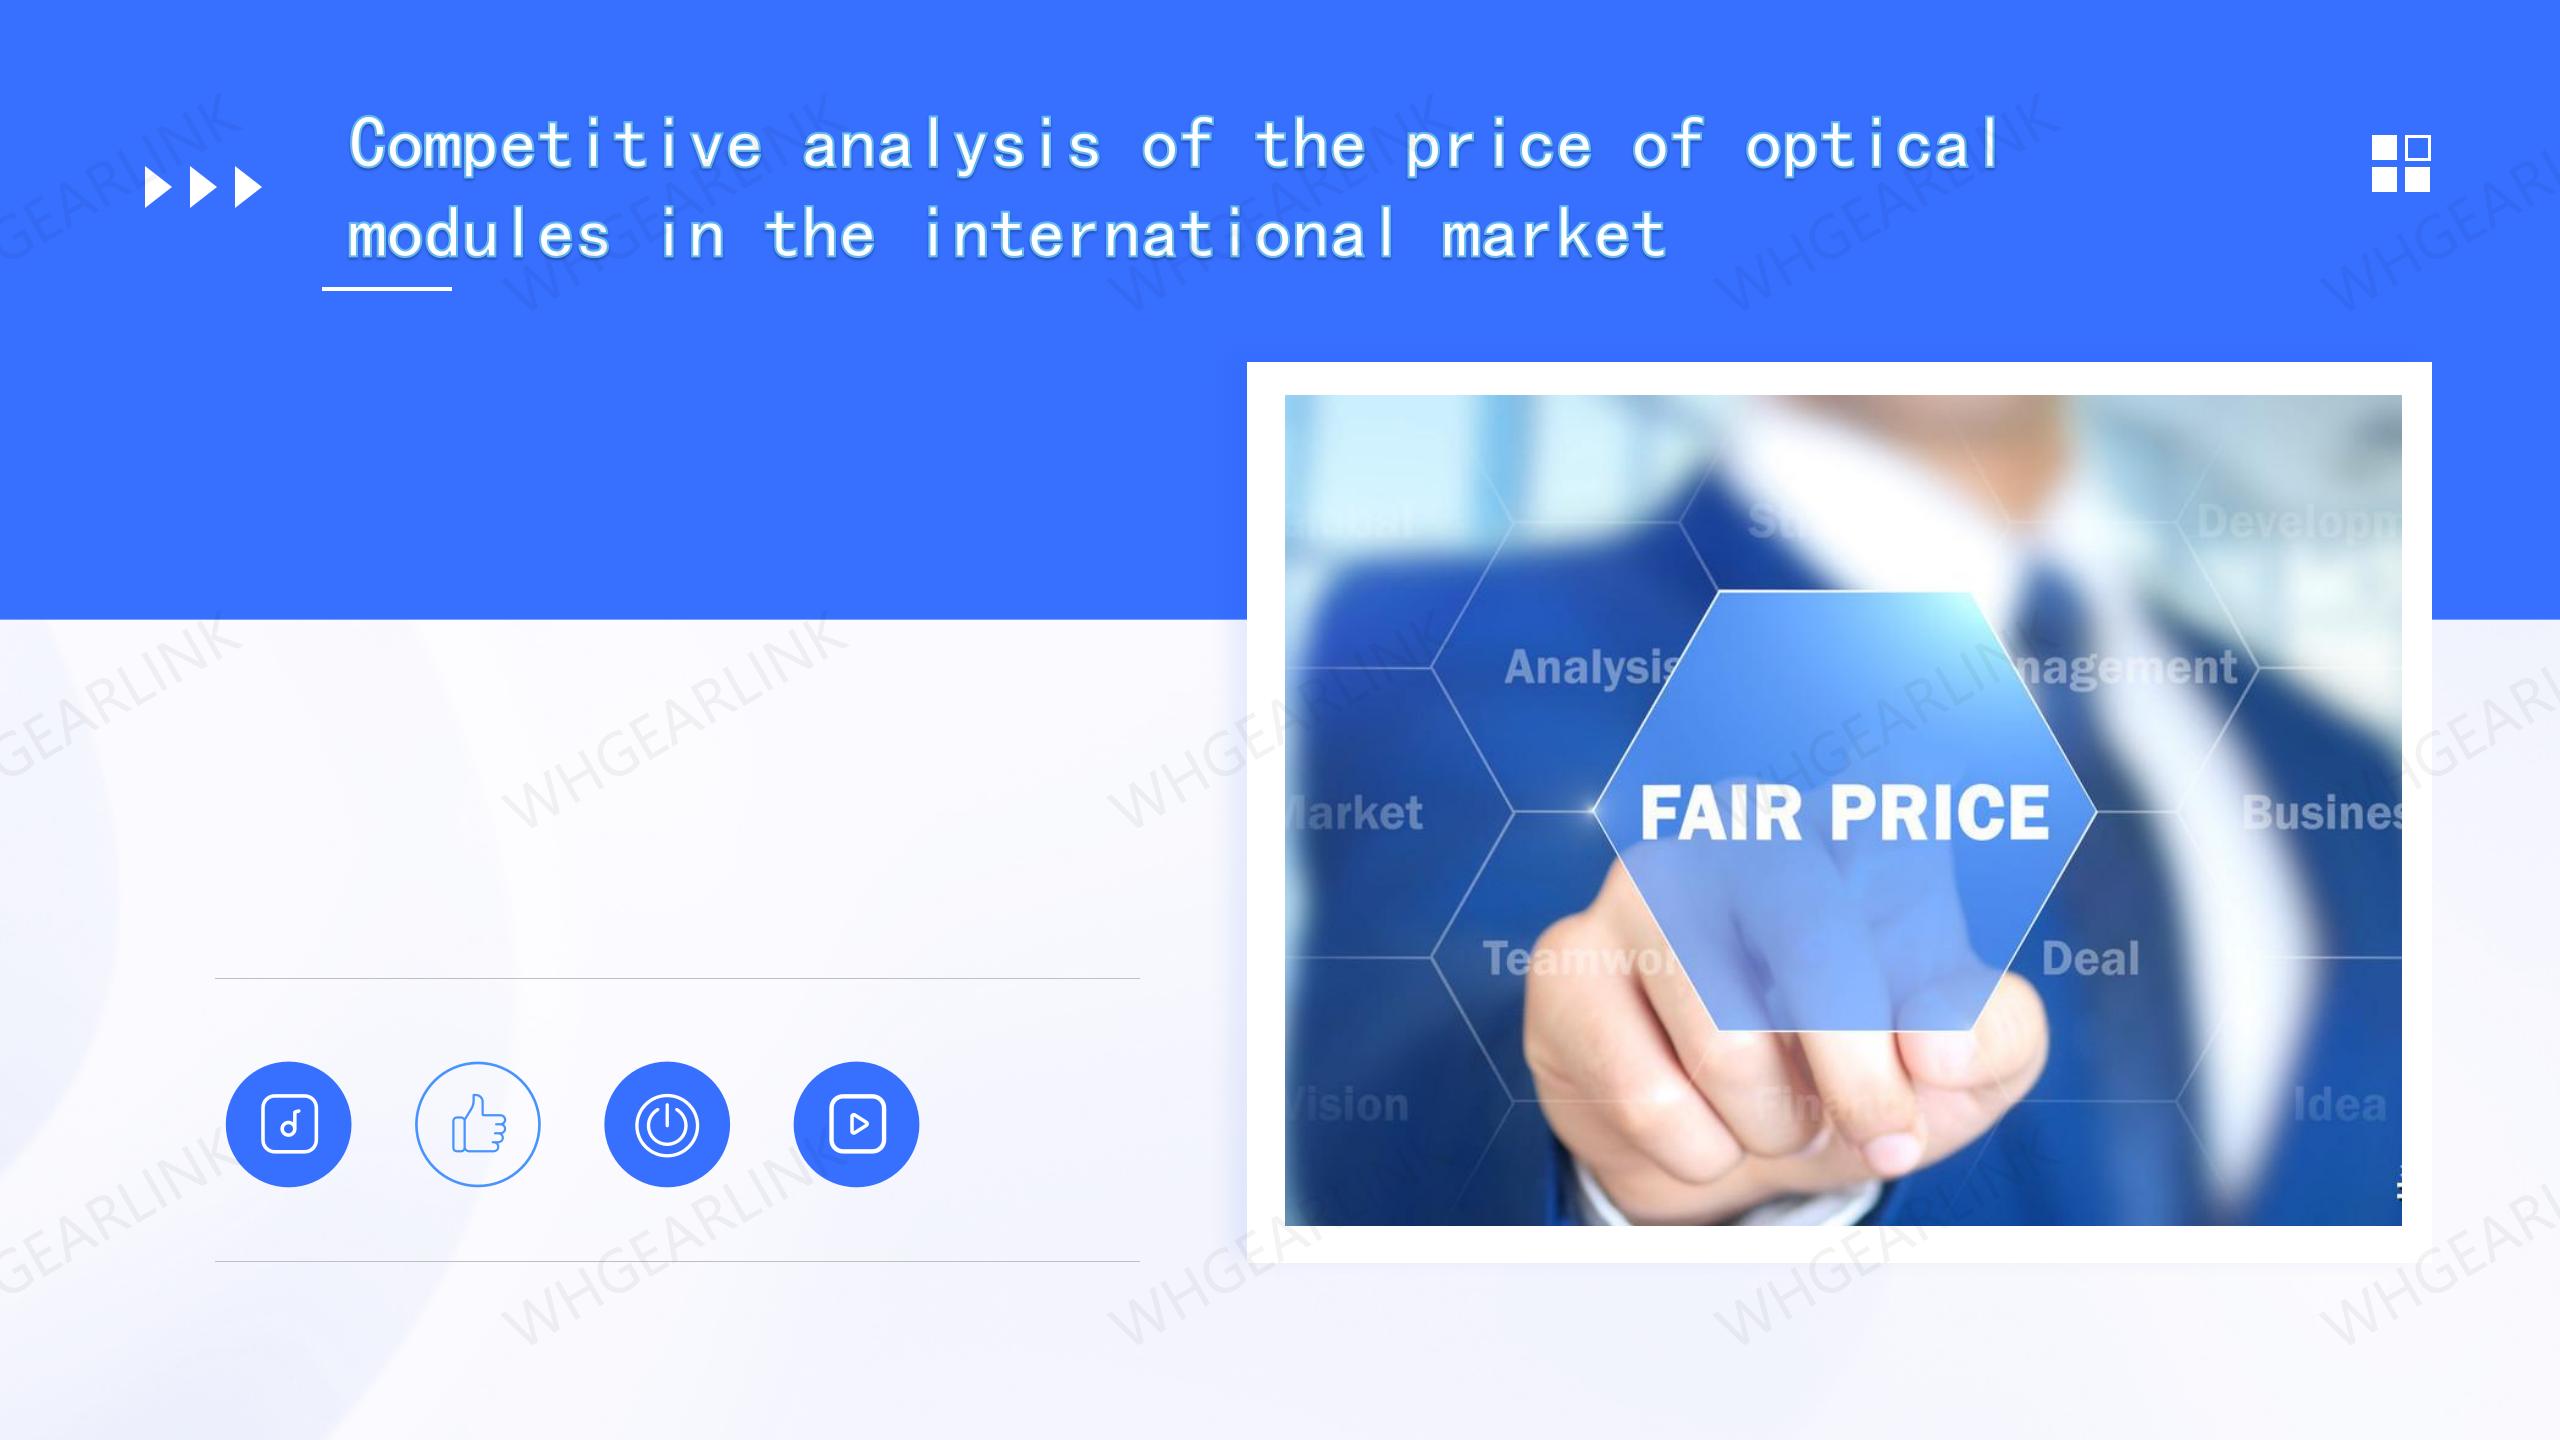 competitive-analysis-of-the-price-of-optical-modules-in-the-international-market.jpg